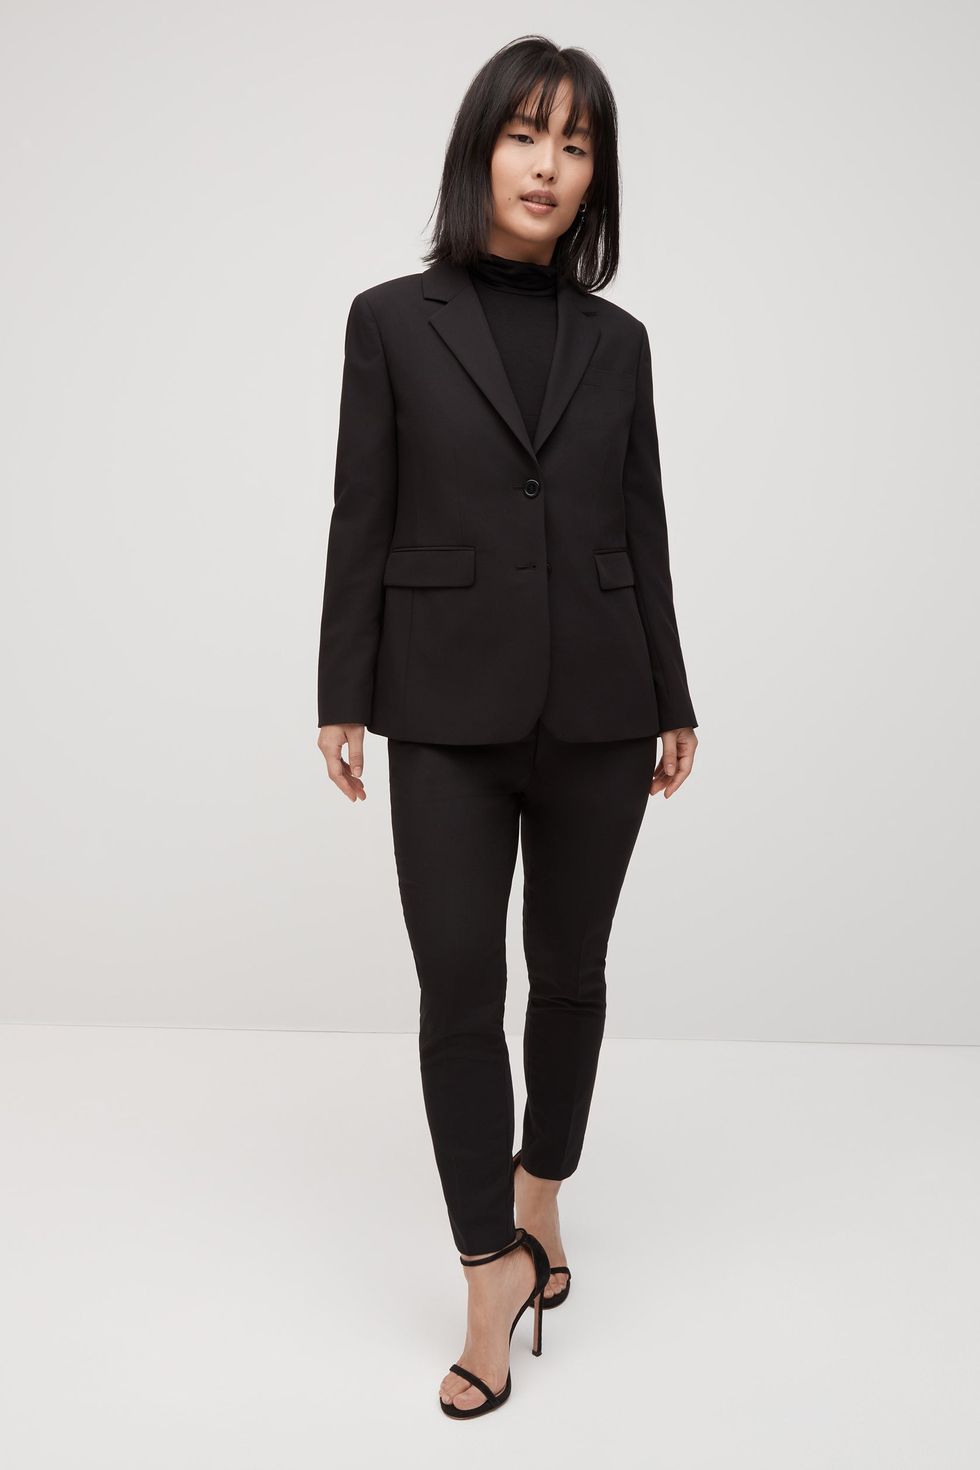 Women Formal Blazer And Pant Suit Red Black Blue With Slanted